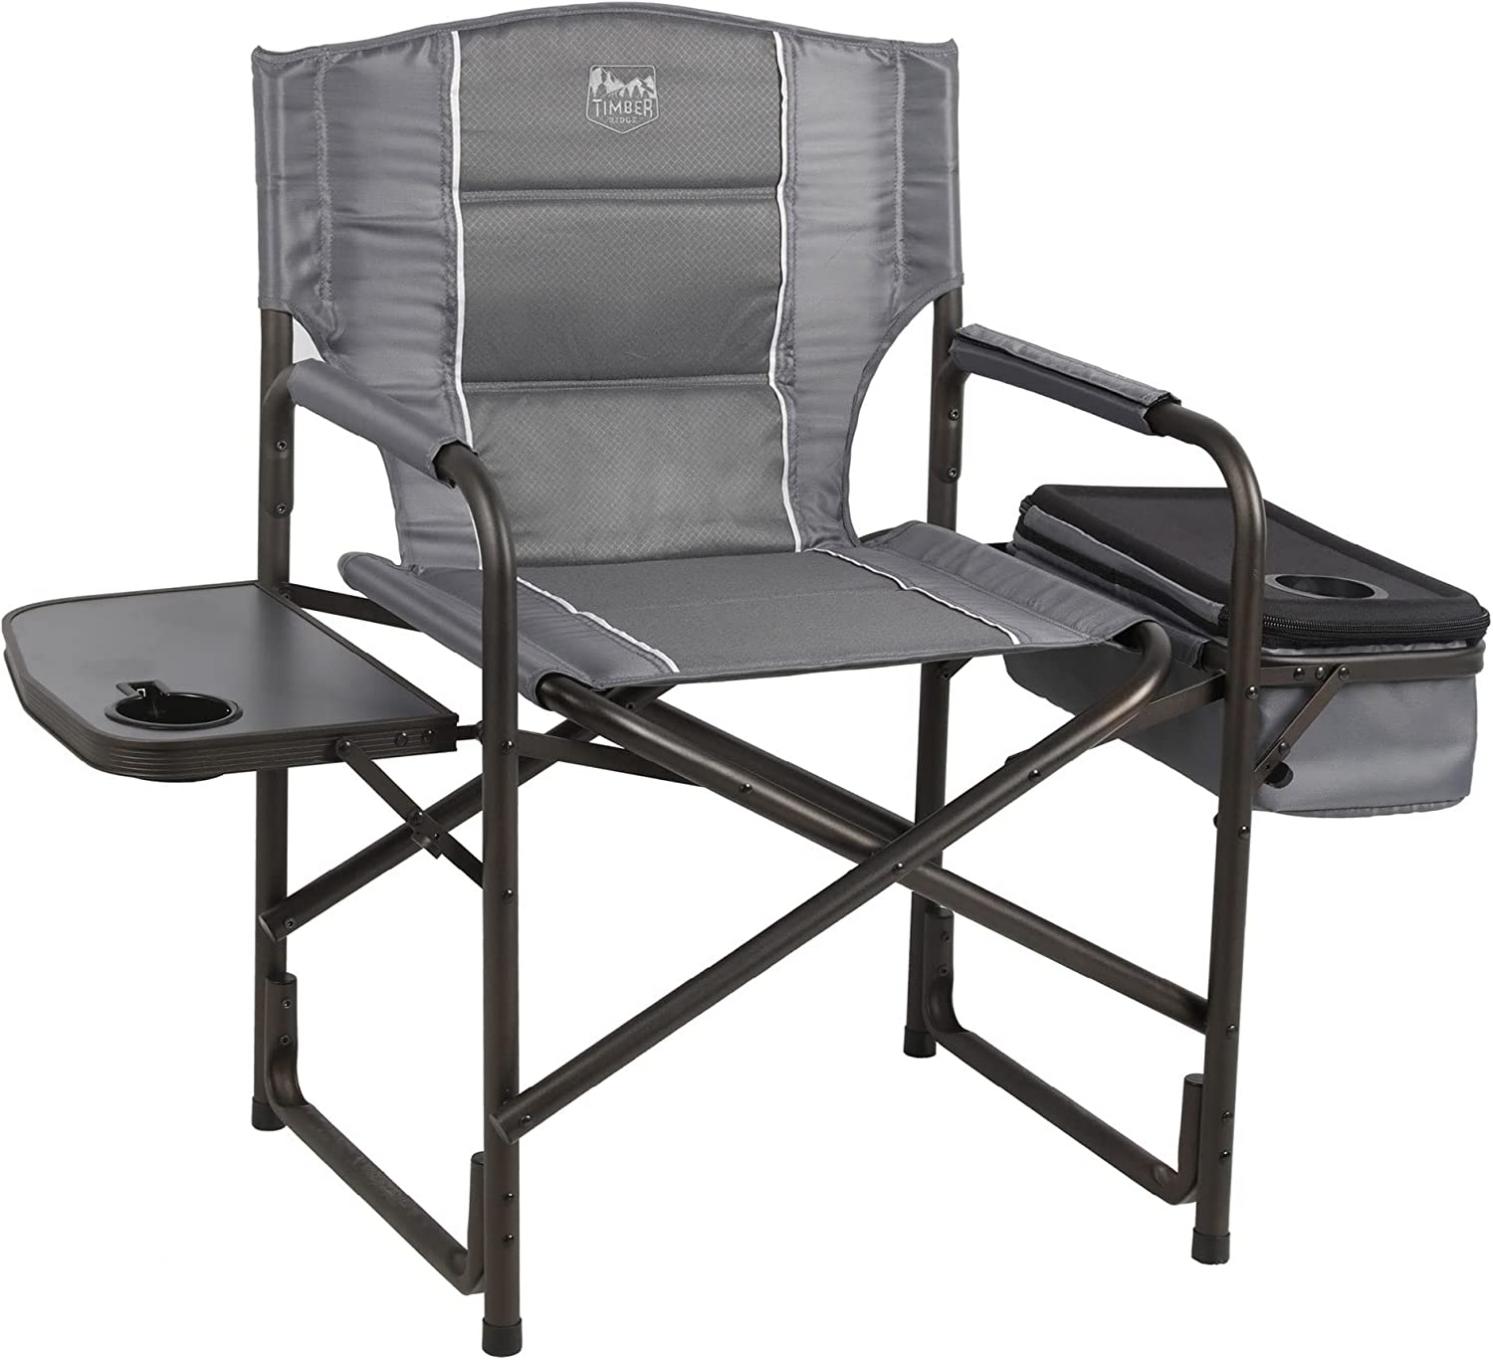 Timber Ridge Laurel Outdoor Folding Director's Chair with Cooler Bag & Side Table, Gray